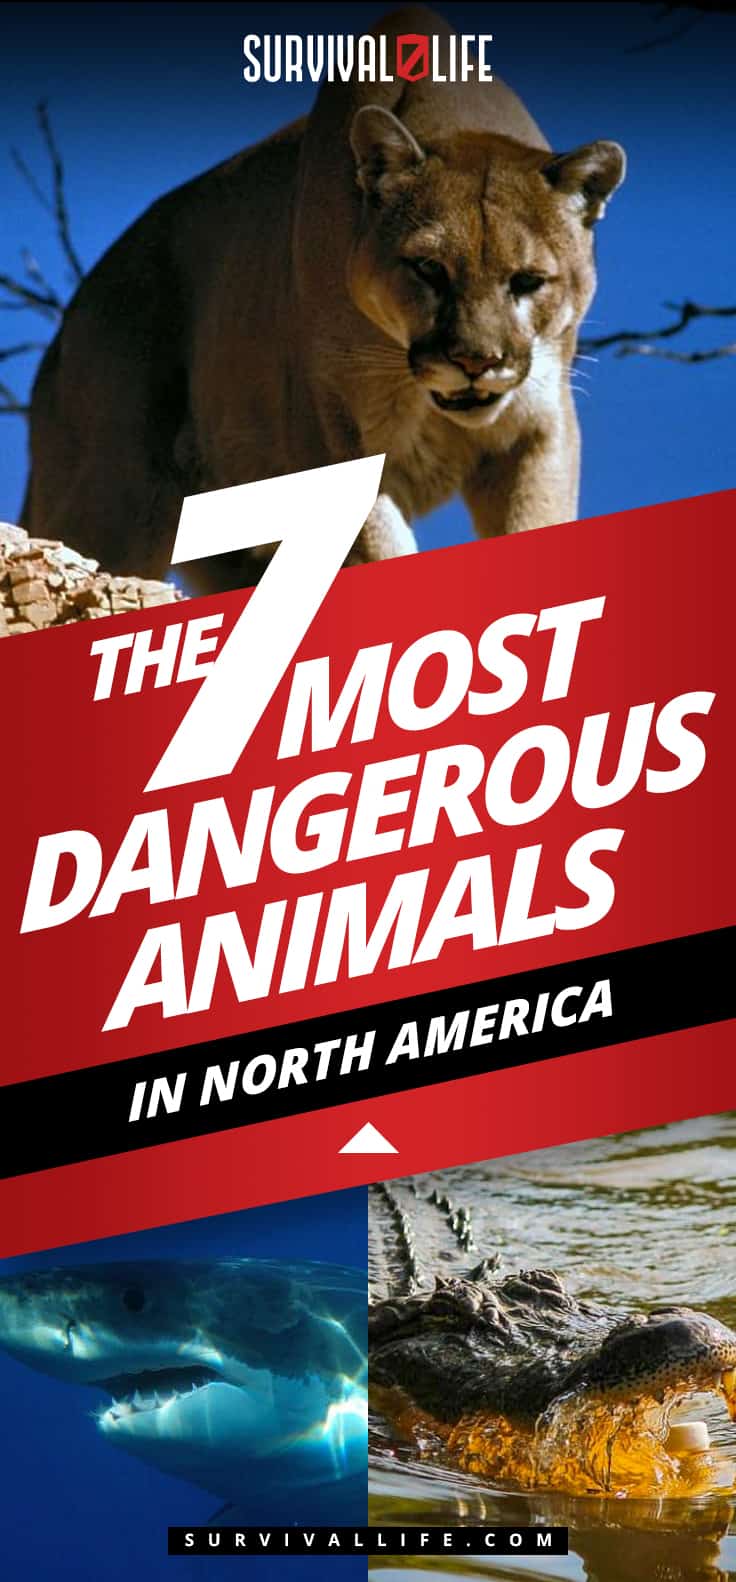 The 7 Most Dangerous Animals In North America